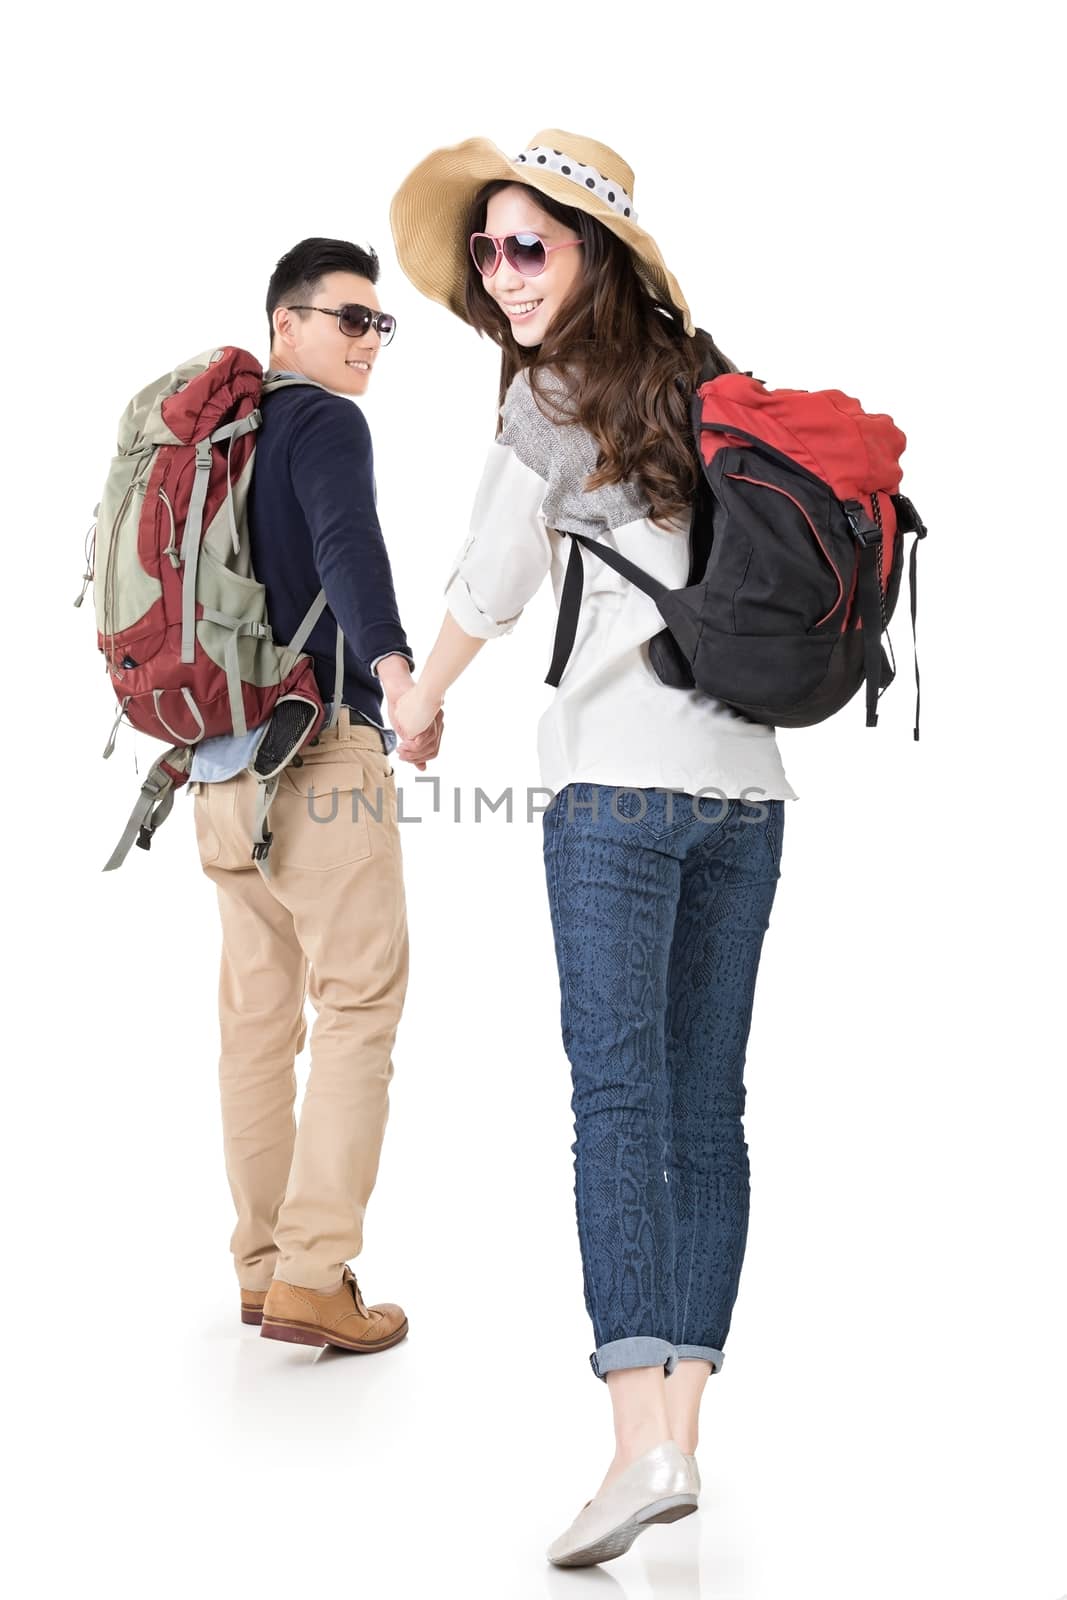 Asian young traveling couple, man holding woman's hand and lead her go to somewhere, full length portrait isolated on white background.